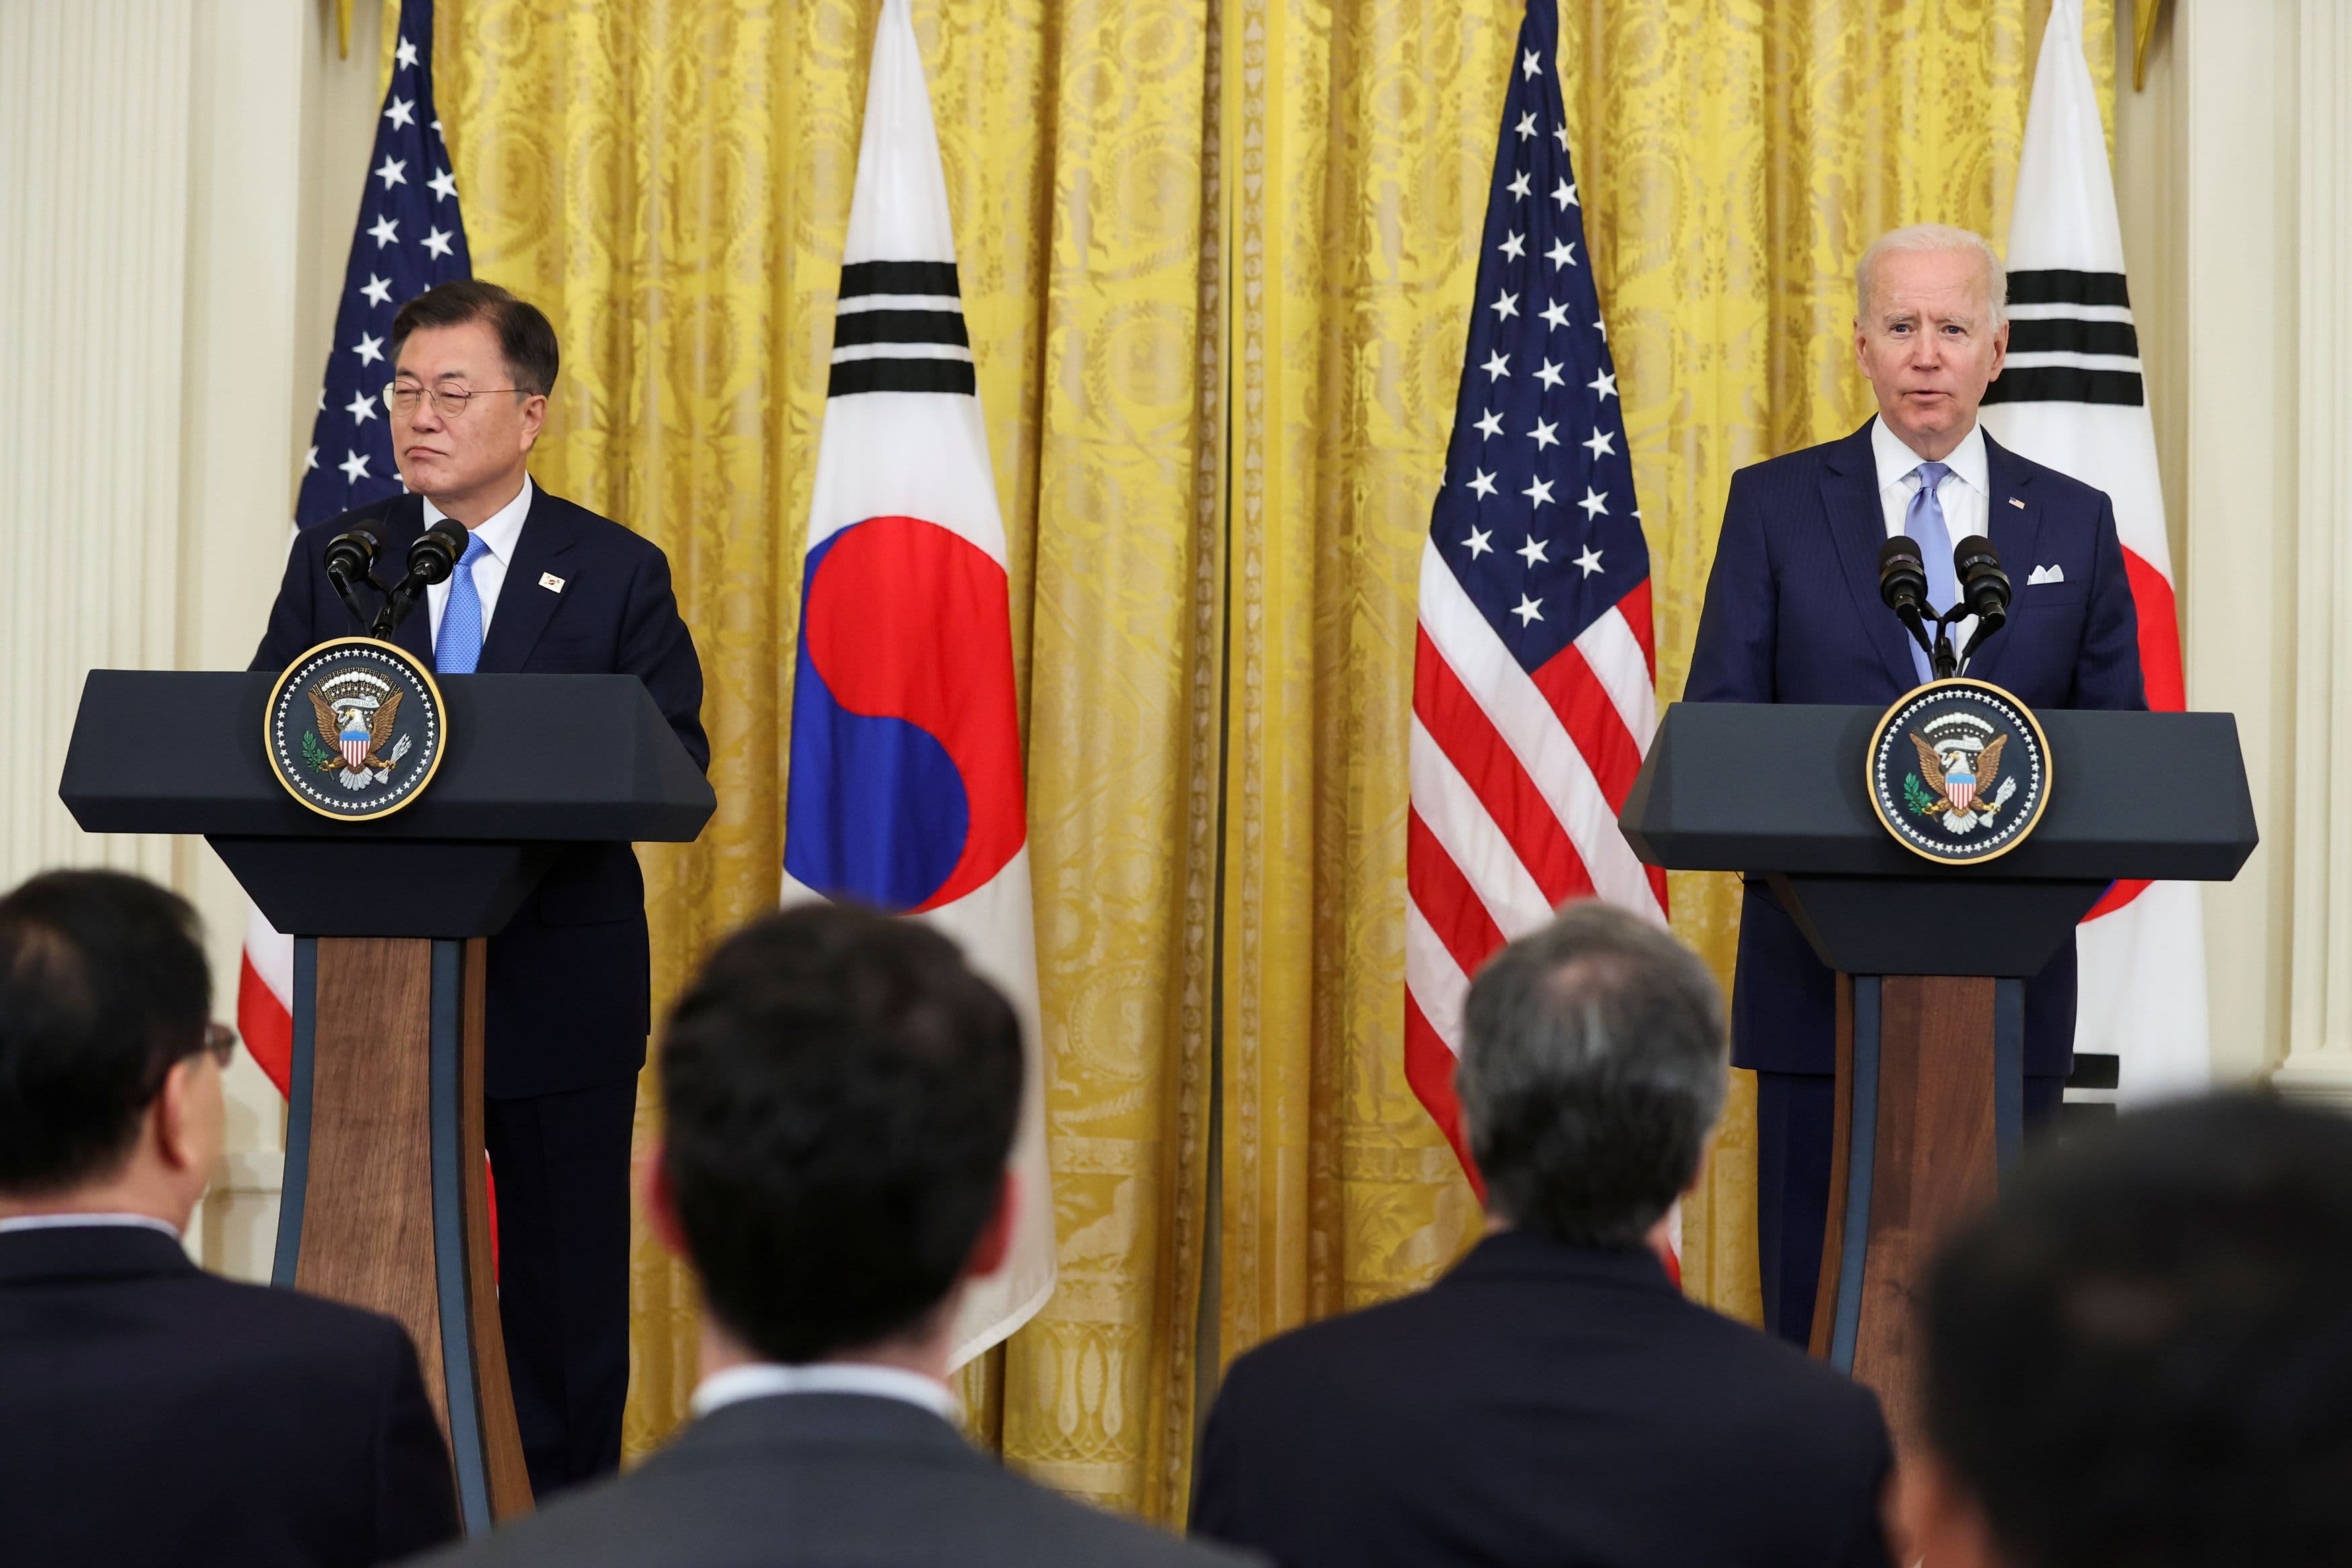 Biden rejects Trump approach to North Korea, says he won't give Kim 'international recognition'